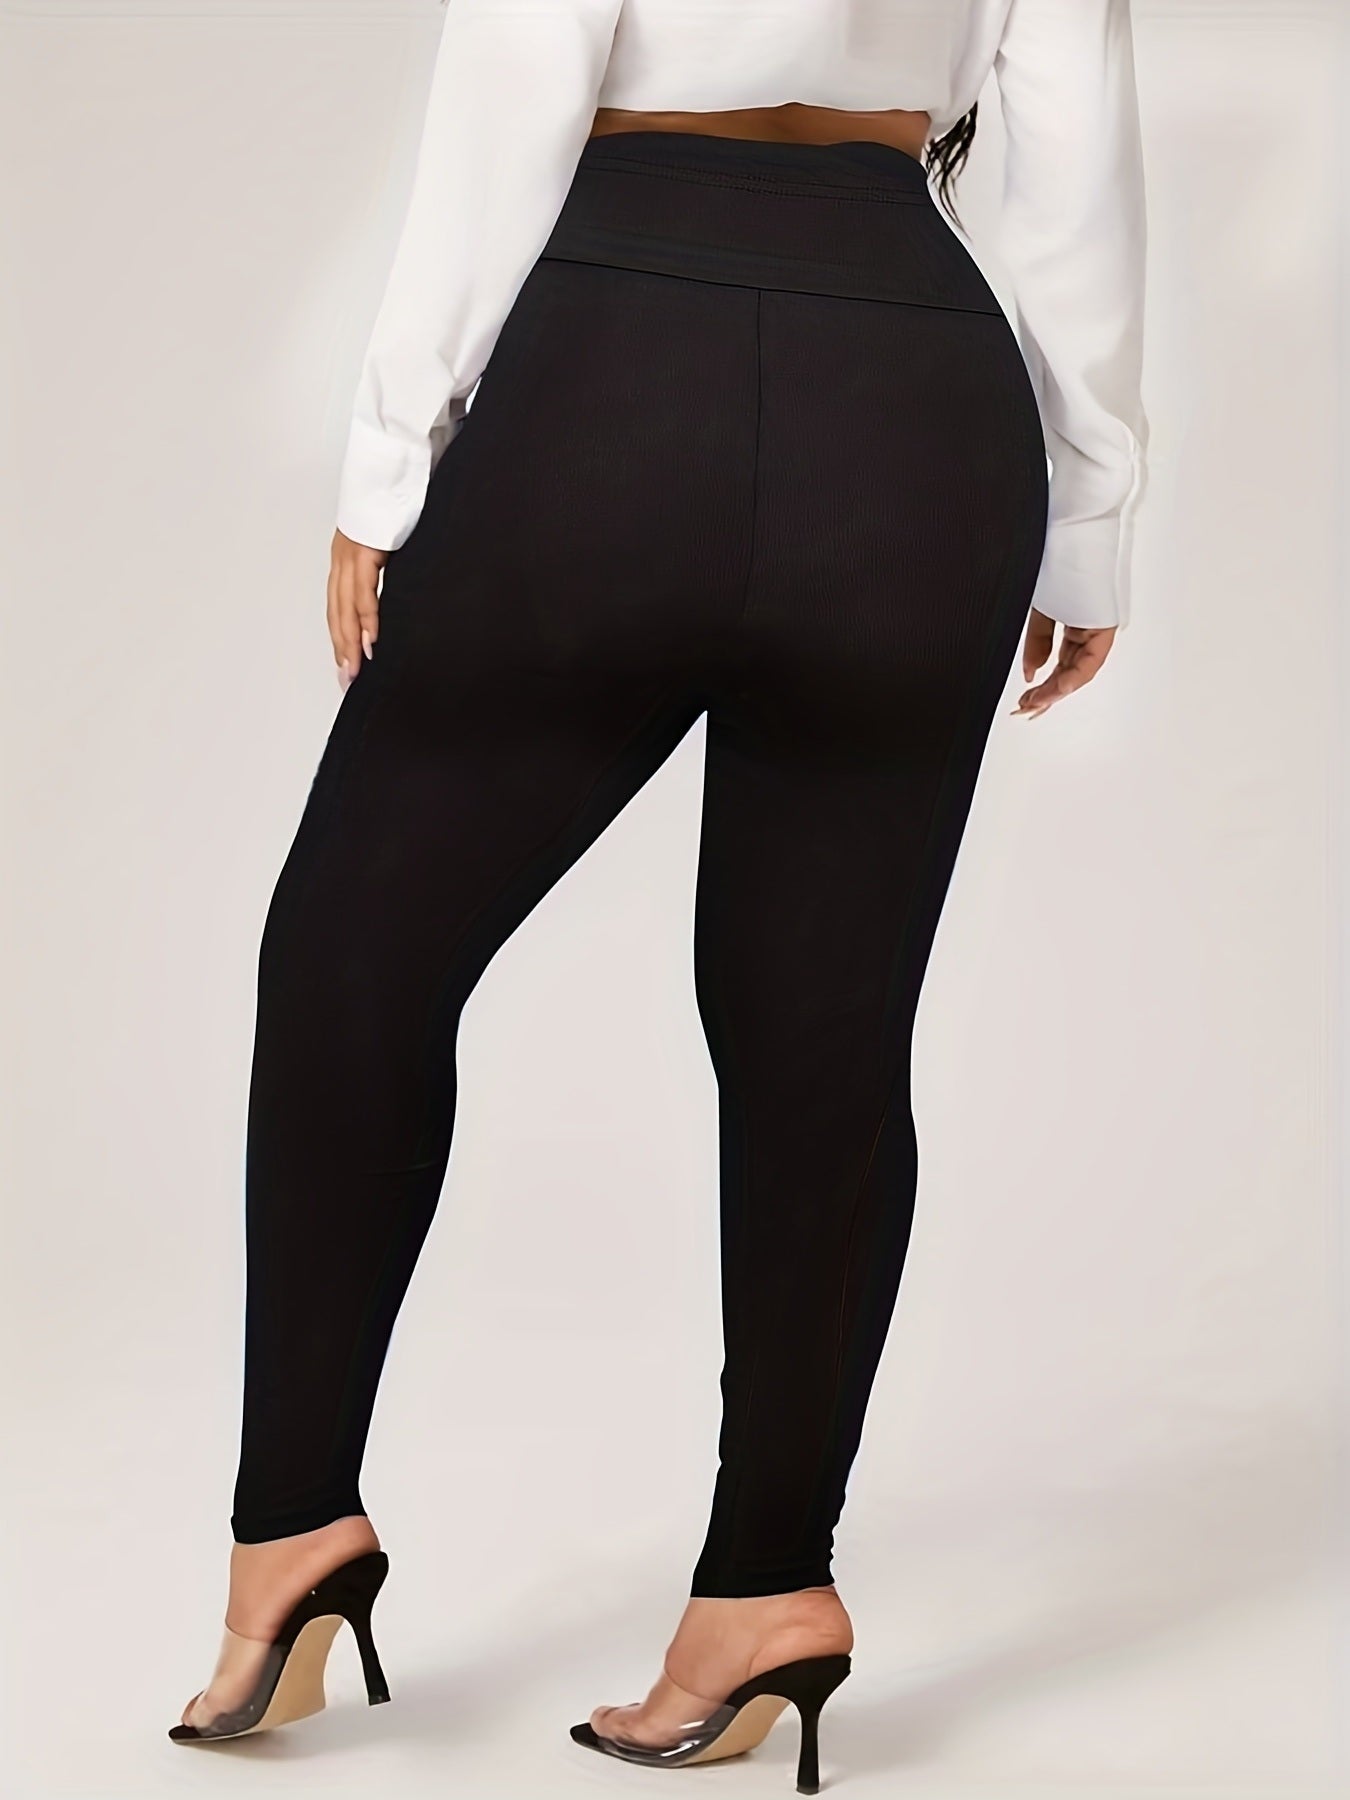 Plus Size Solid Color High Waist Leggings; Women's Plus Casual High Stretch Skinny Leggings